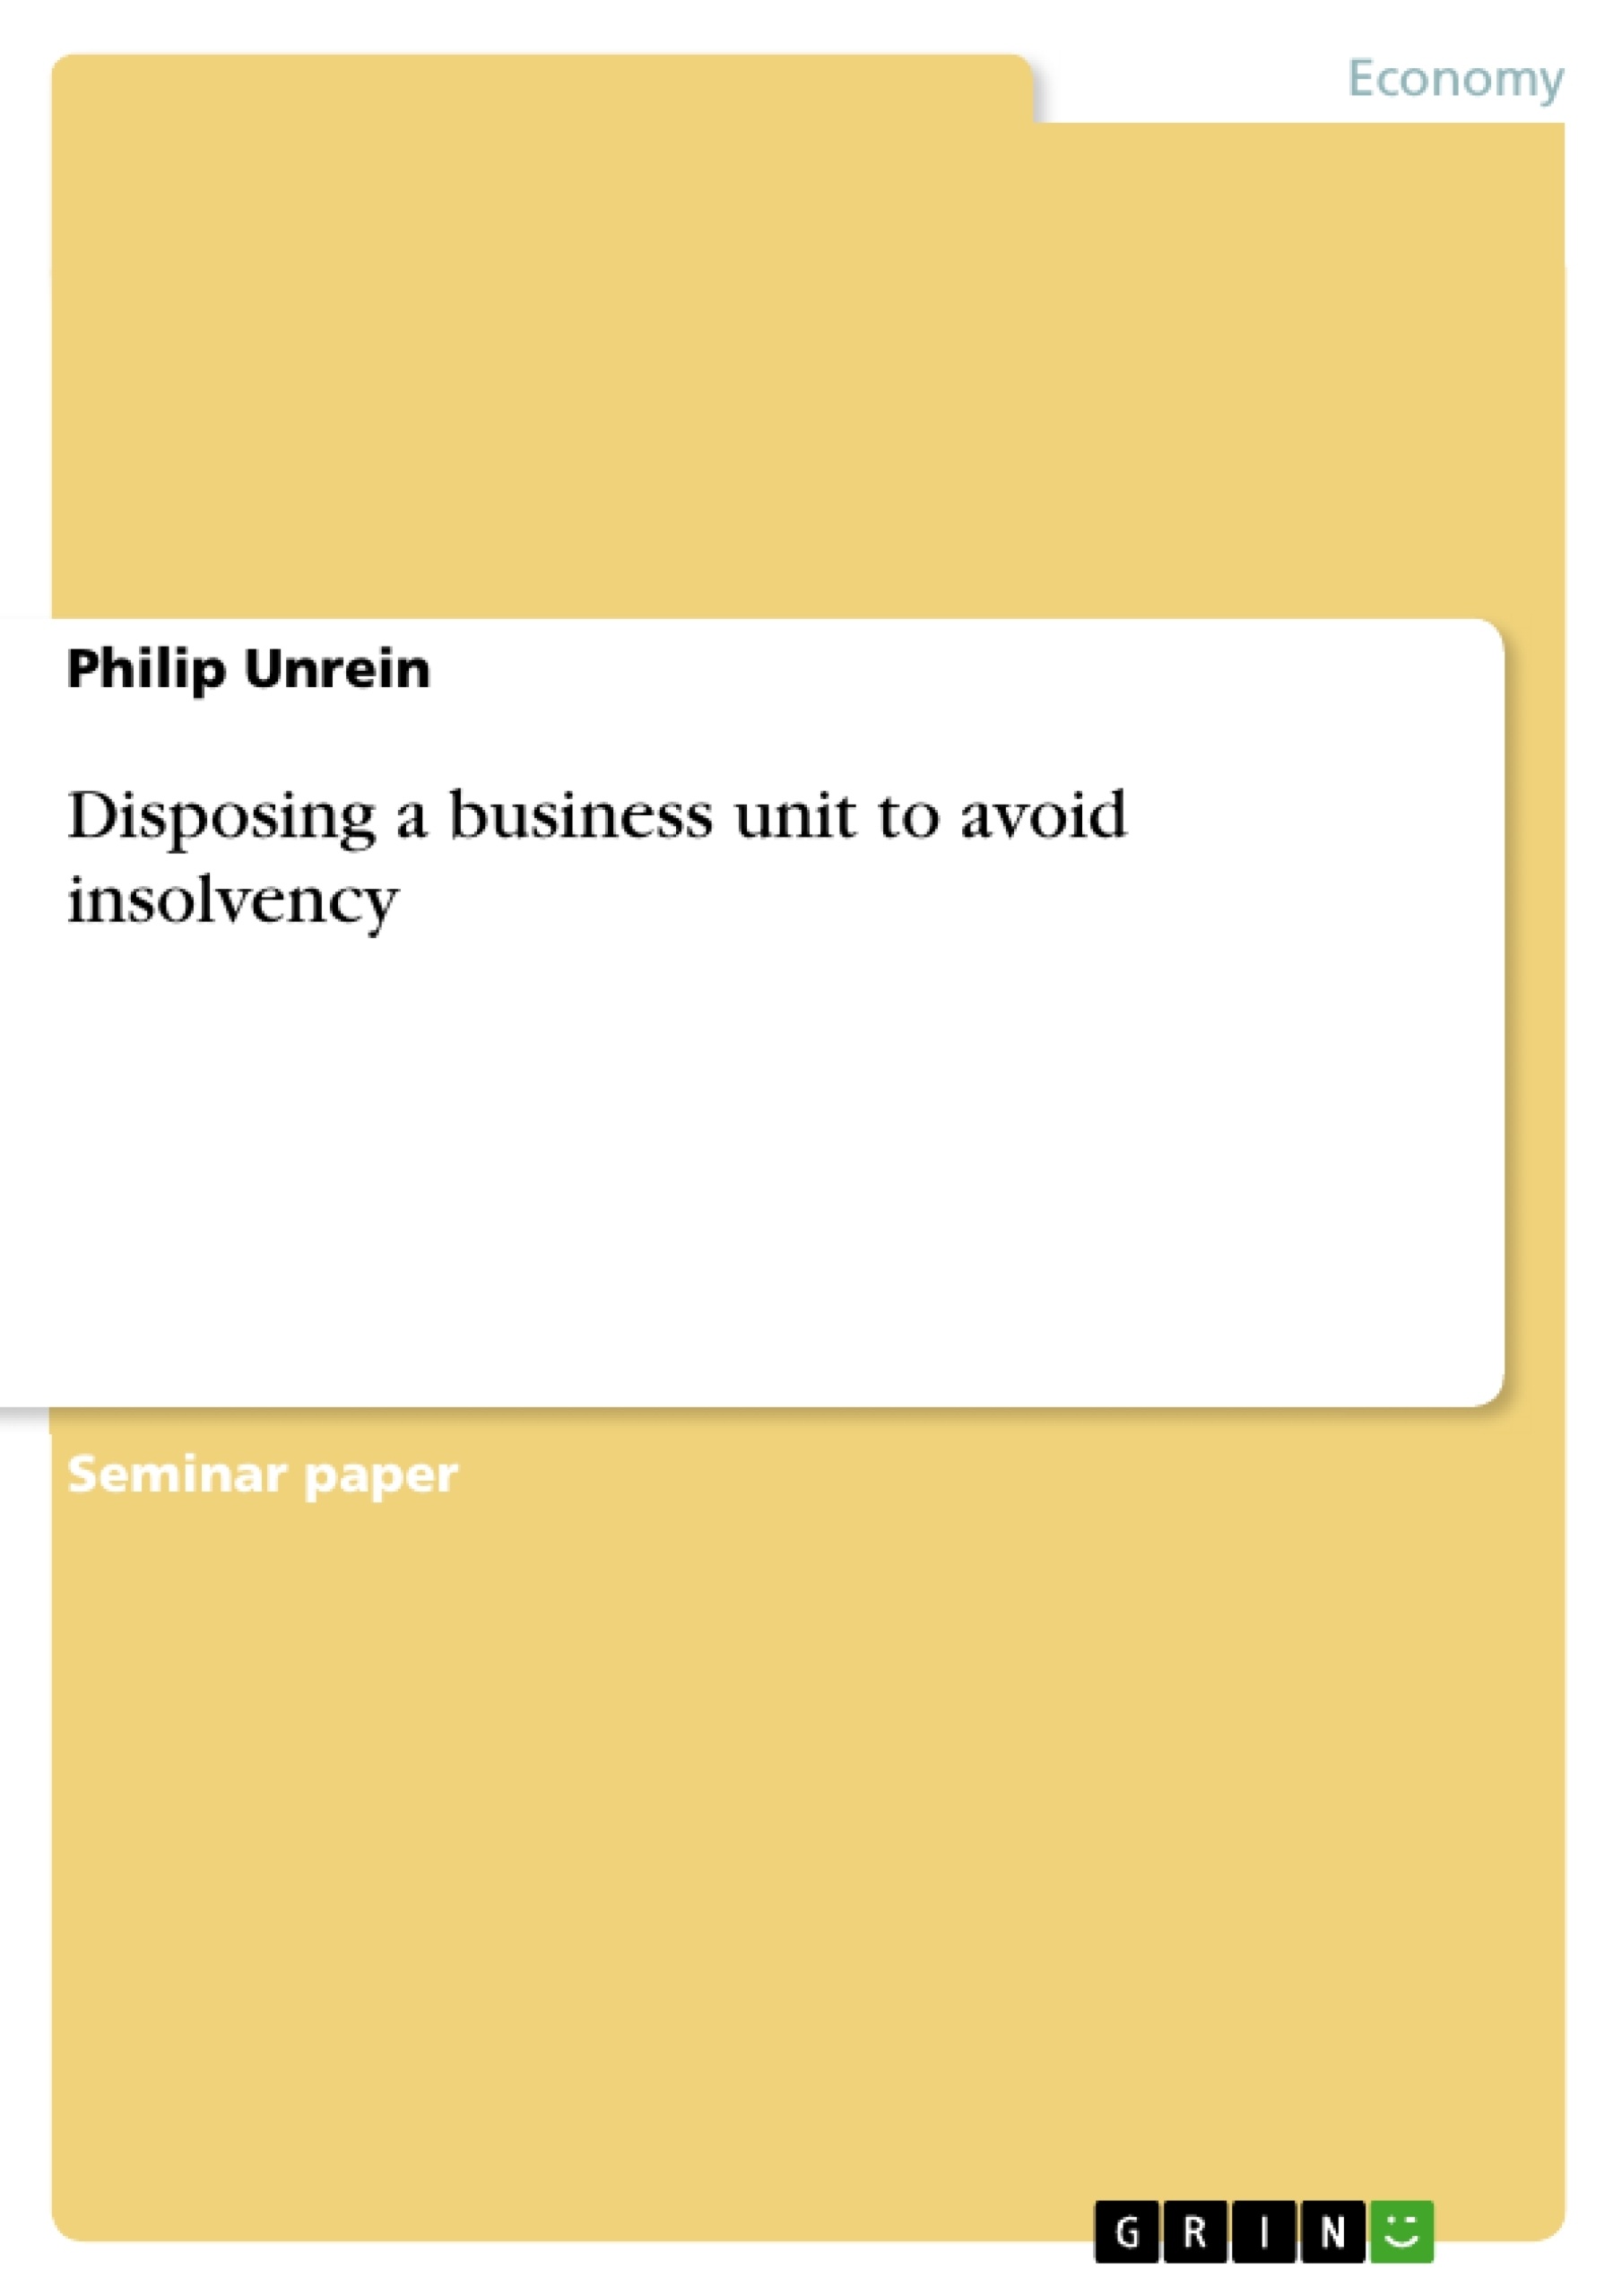 Title: Disposing a business unit to avoid insolvency